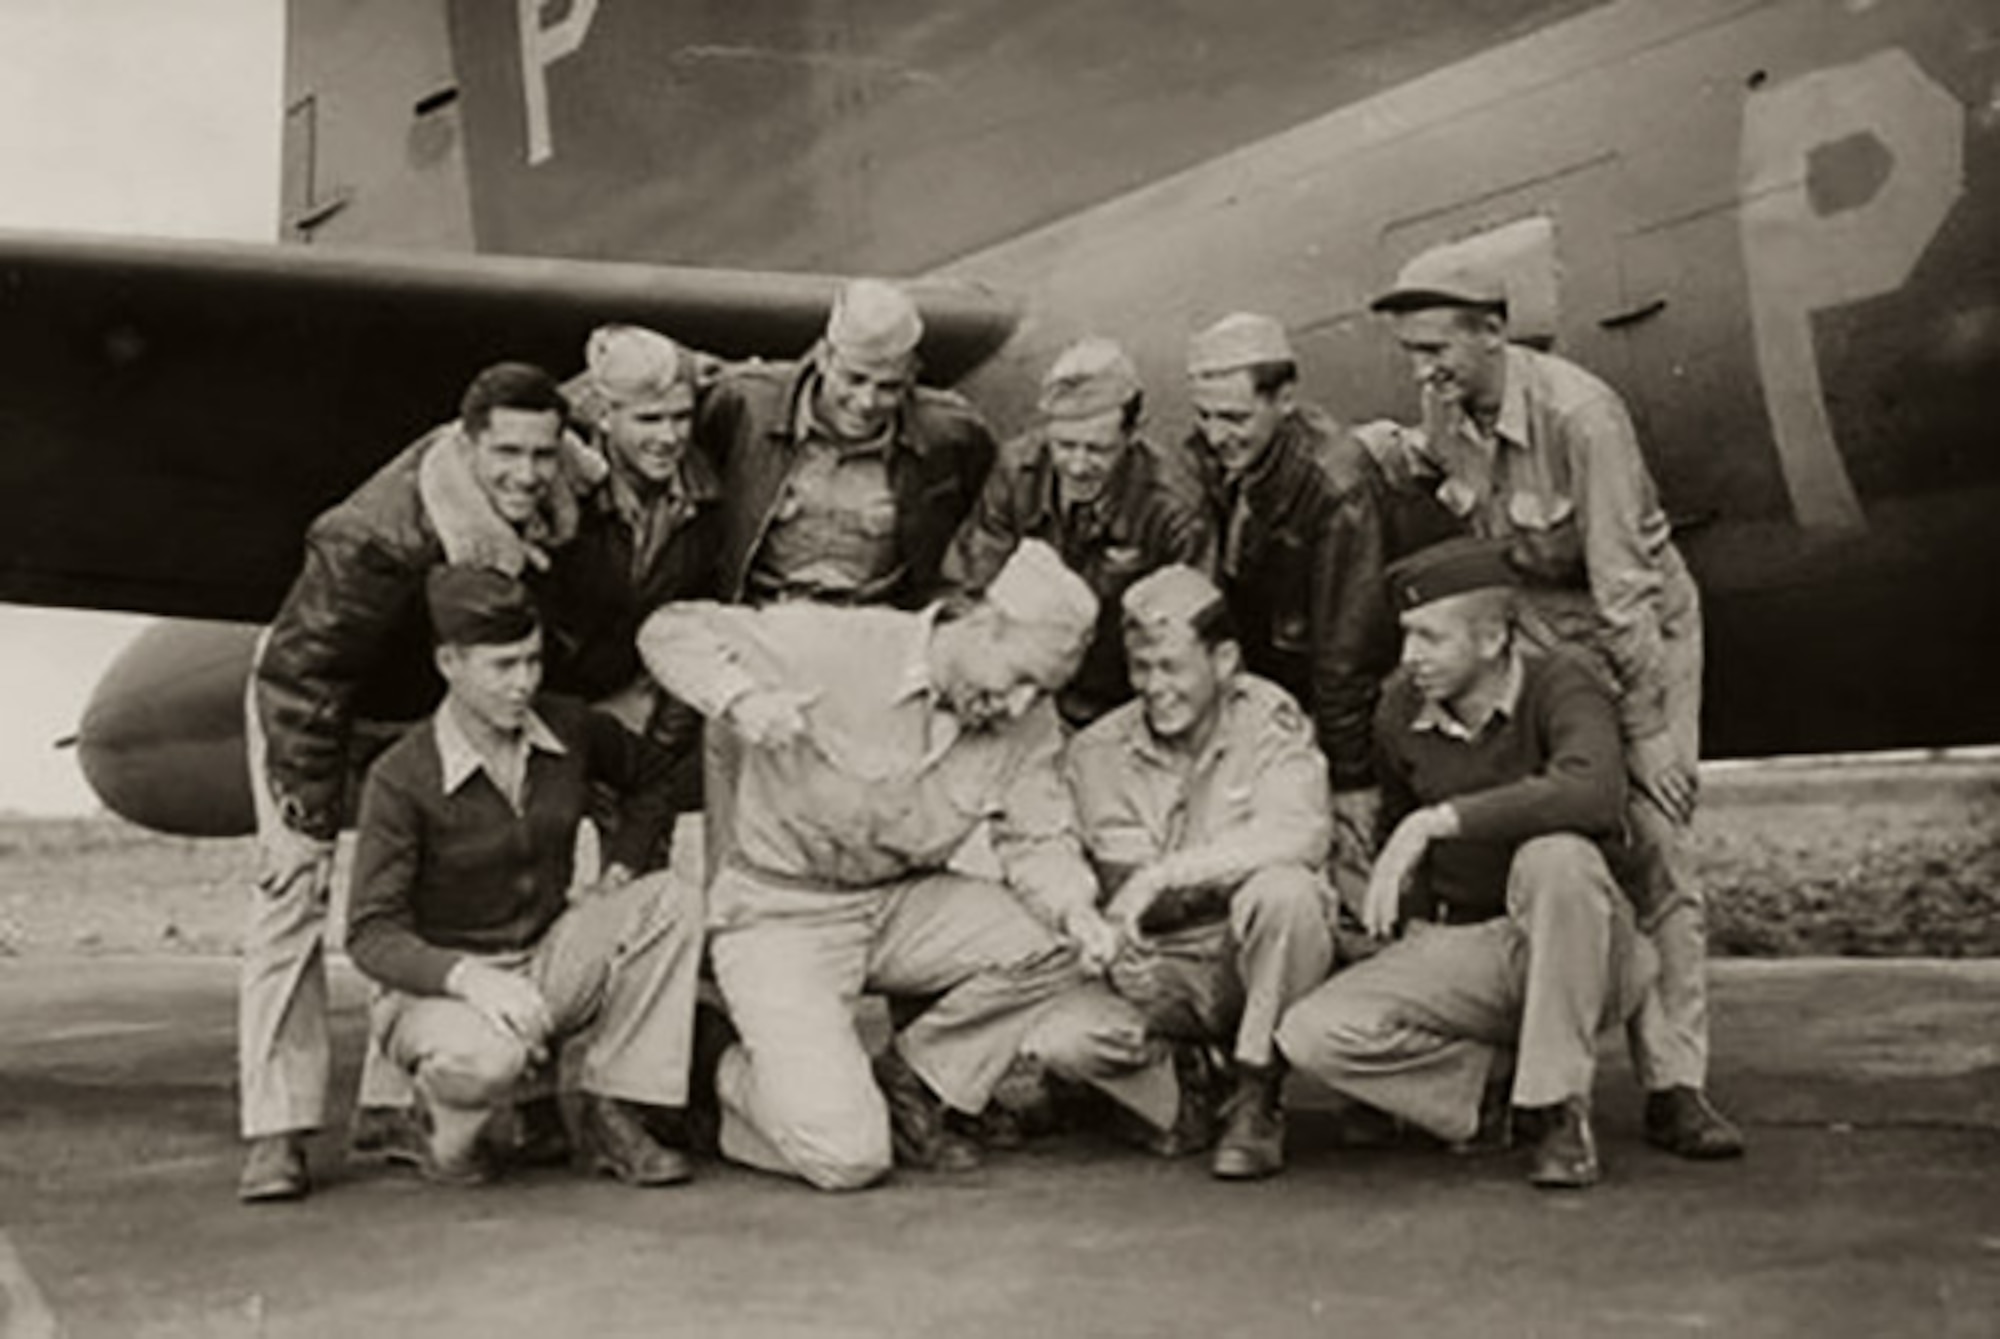 Then-1st Lt. Robert “Bob” Wolff, front row, second from right, 100th Bomb Group and World War II veteran and pilot, along with his crew – known as the “Wolff Pack” – pose for a photo in 1943 at Thorpe Abbotts, England, after returning from the Regensburg mission over Germany. Wolff was a B-17 Flying Fortress pilot and well known for his affability, good sense of humor and remarkable flying skills. (Photo courtesy of 100th Bomb Group Foundation photo archives)